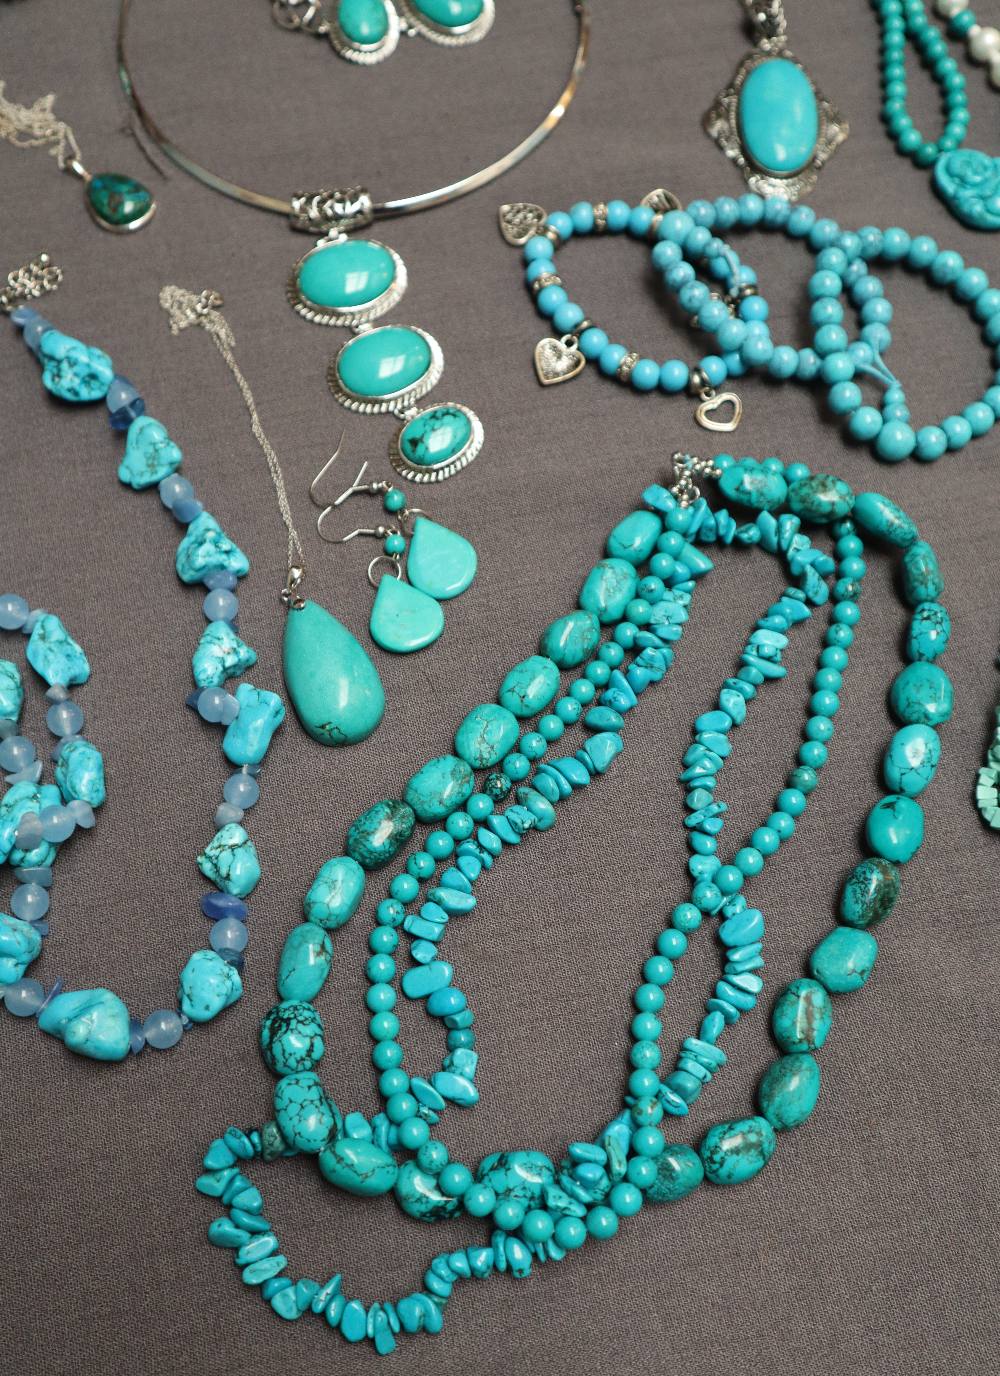 Turquoise beaded necklaces together with turquoise set bracelets, - Image 4 of 9